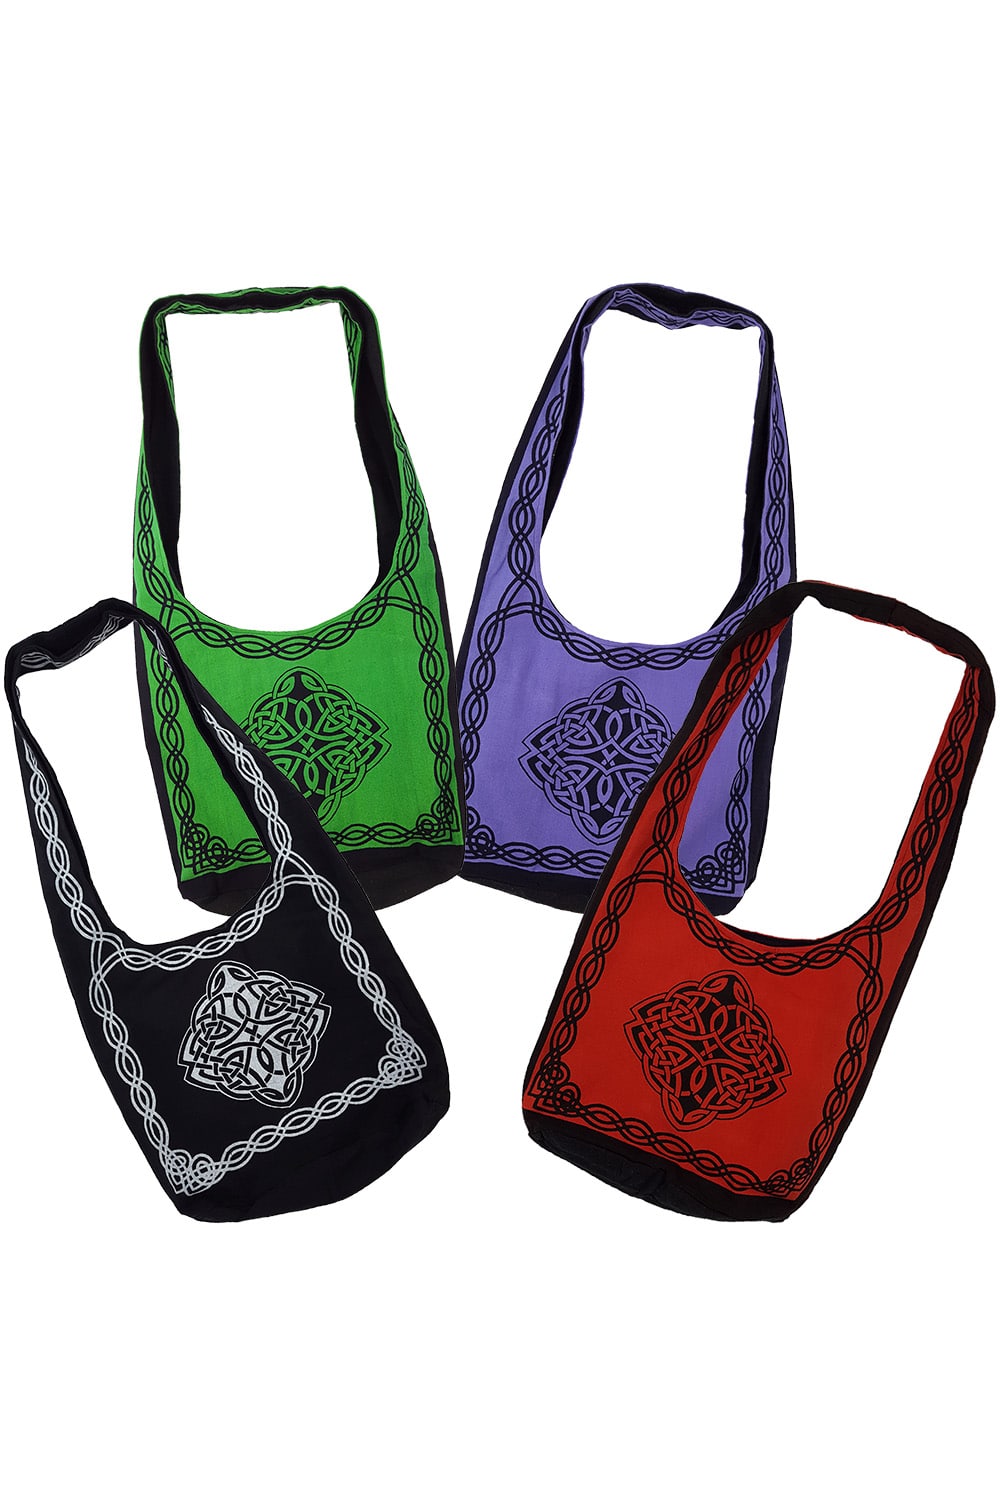 Celtic Knot Book Bags